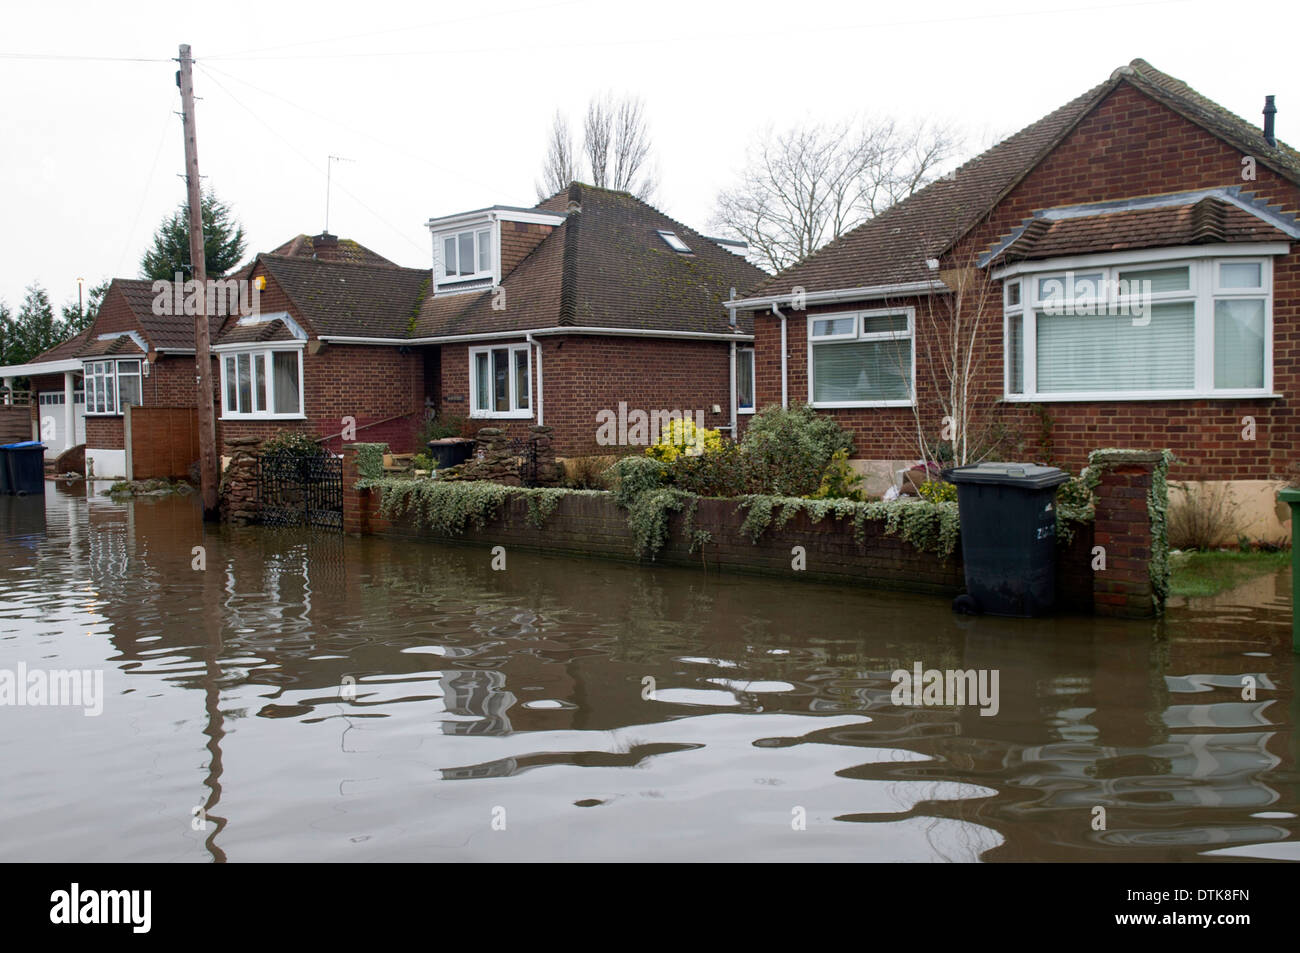 Flooded residential area and park in Staines. Driveway and streets flooded. Stock Photo